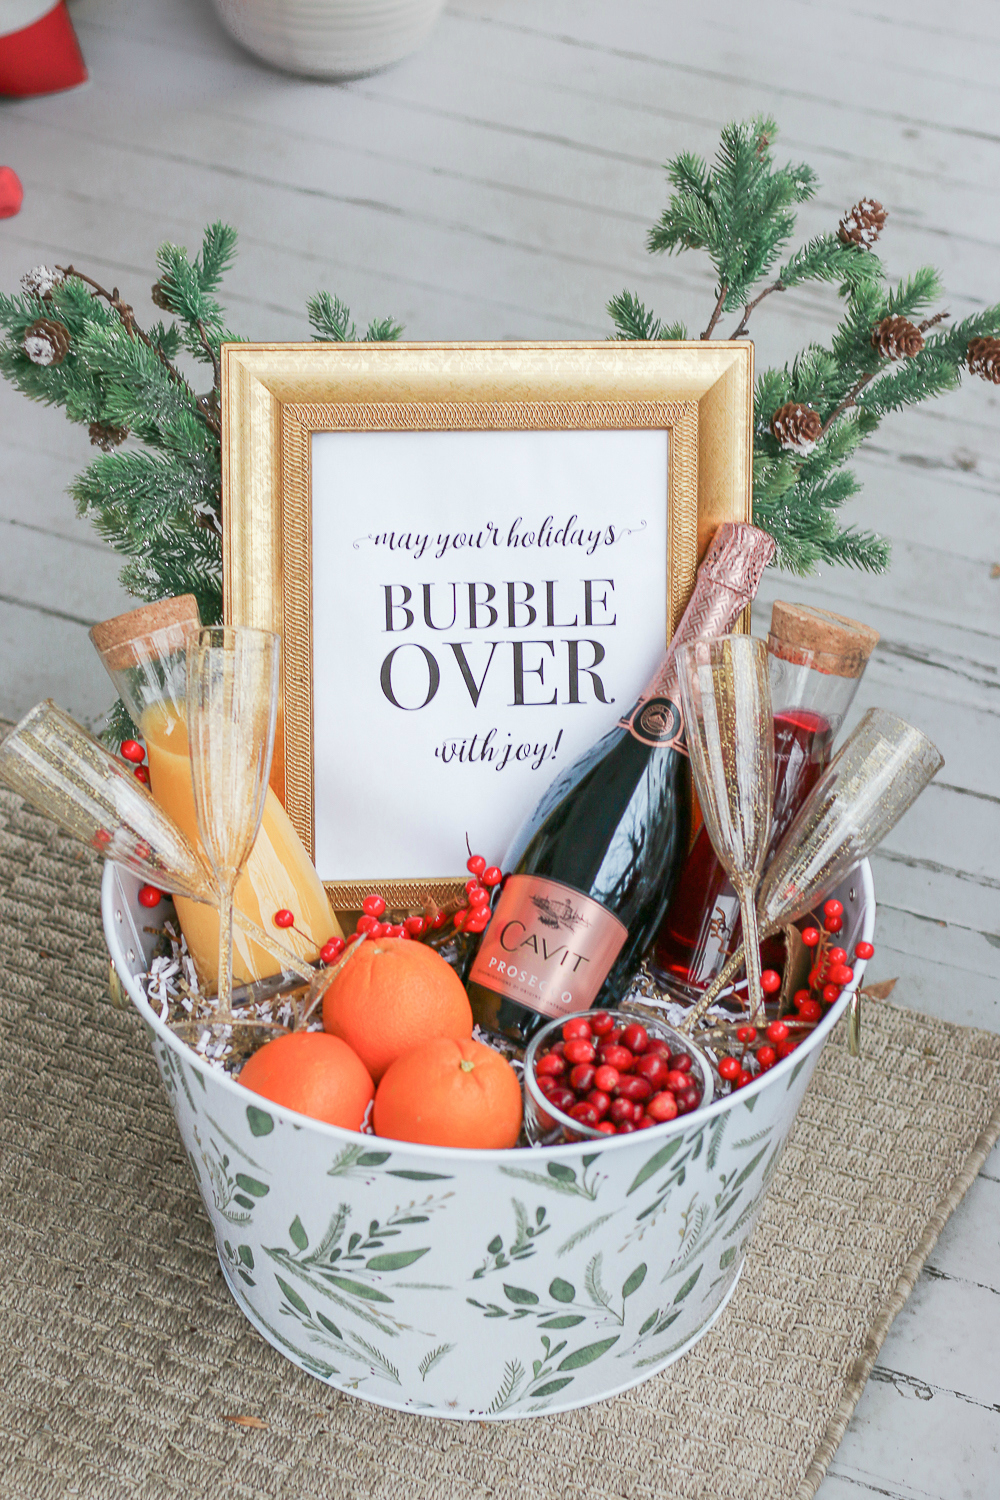 DIY Christmas Morning Mimosa Gift Basket by southern lifestyle blogger Stephanie Ziajka from Diary of a Debutante, Cavit Prosecco review, prosecco gift basket ideas, mimosa champagne gift basket idea, cute wine gift basket ideas for the holidays